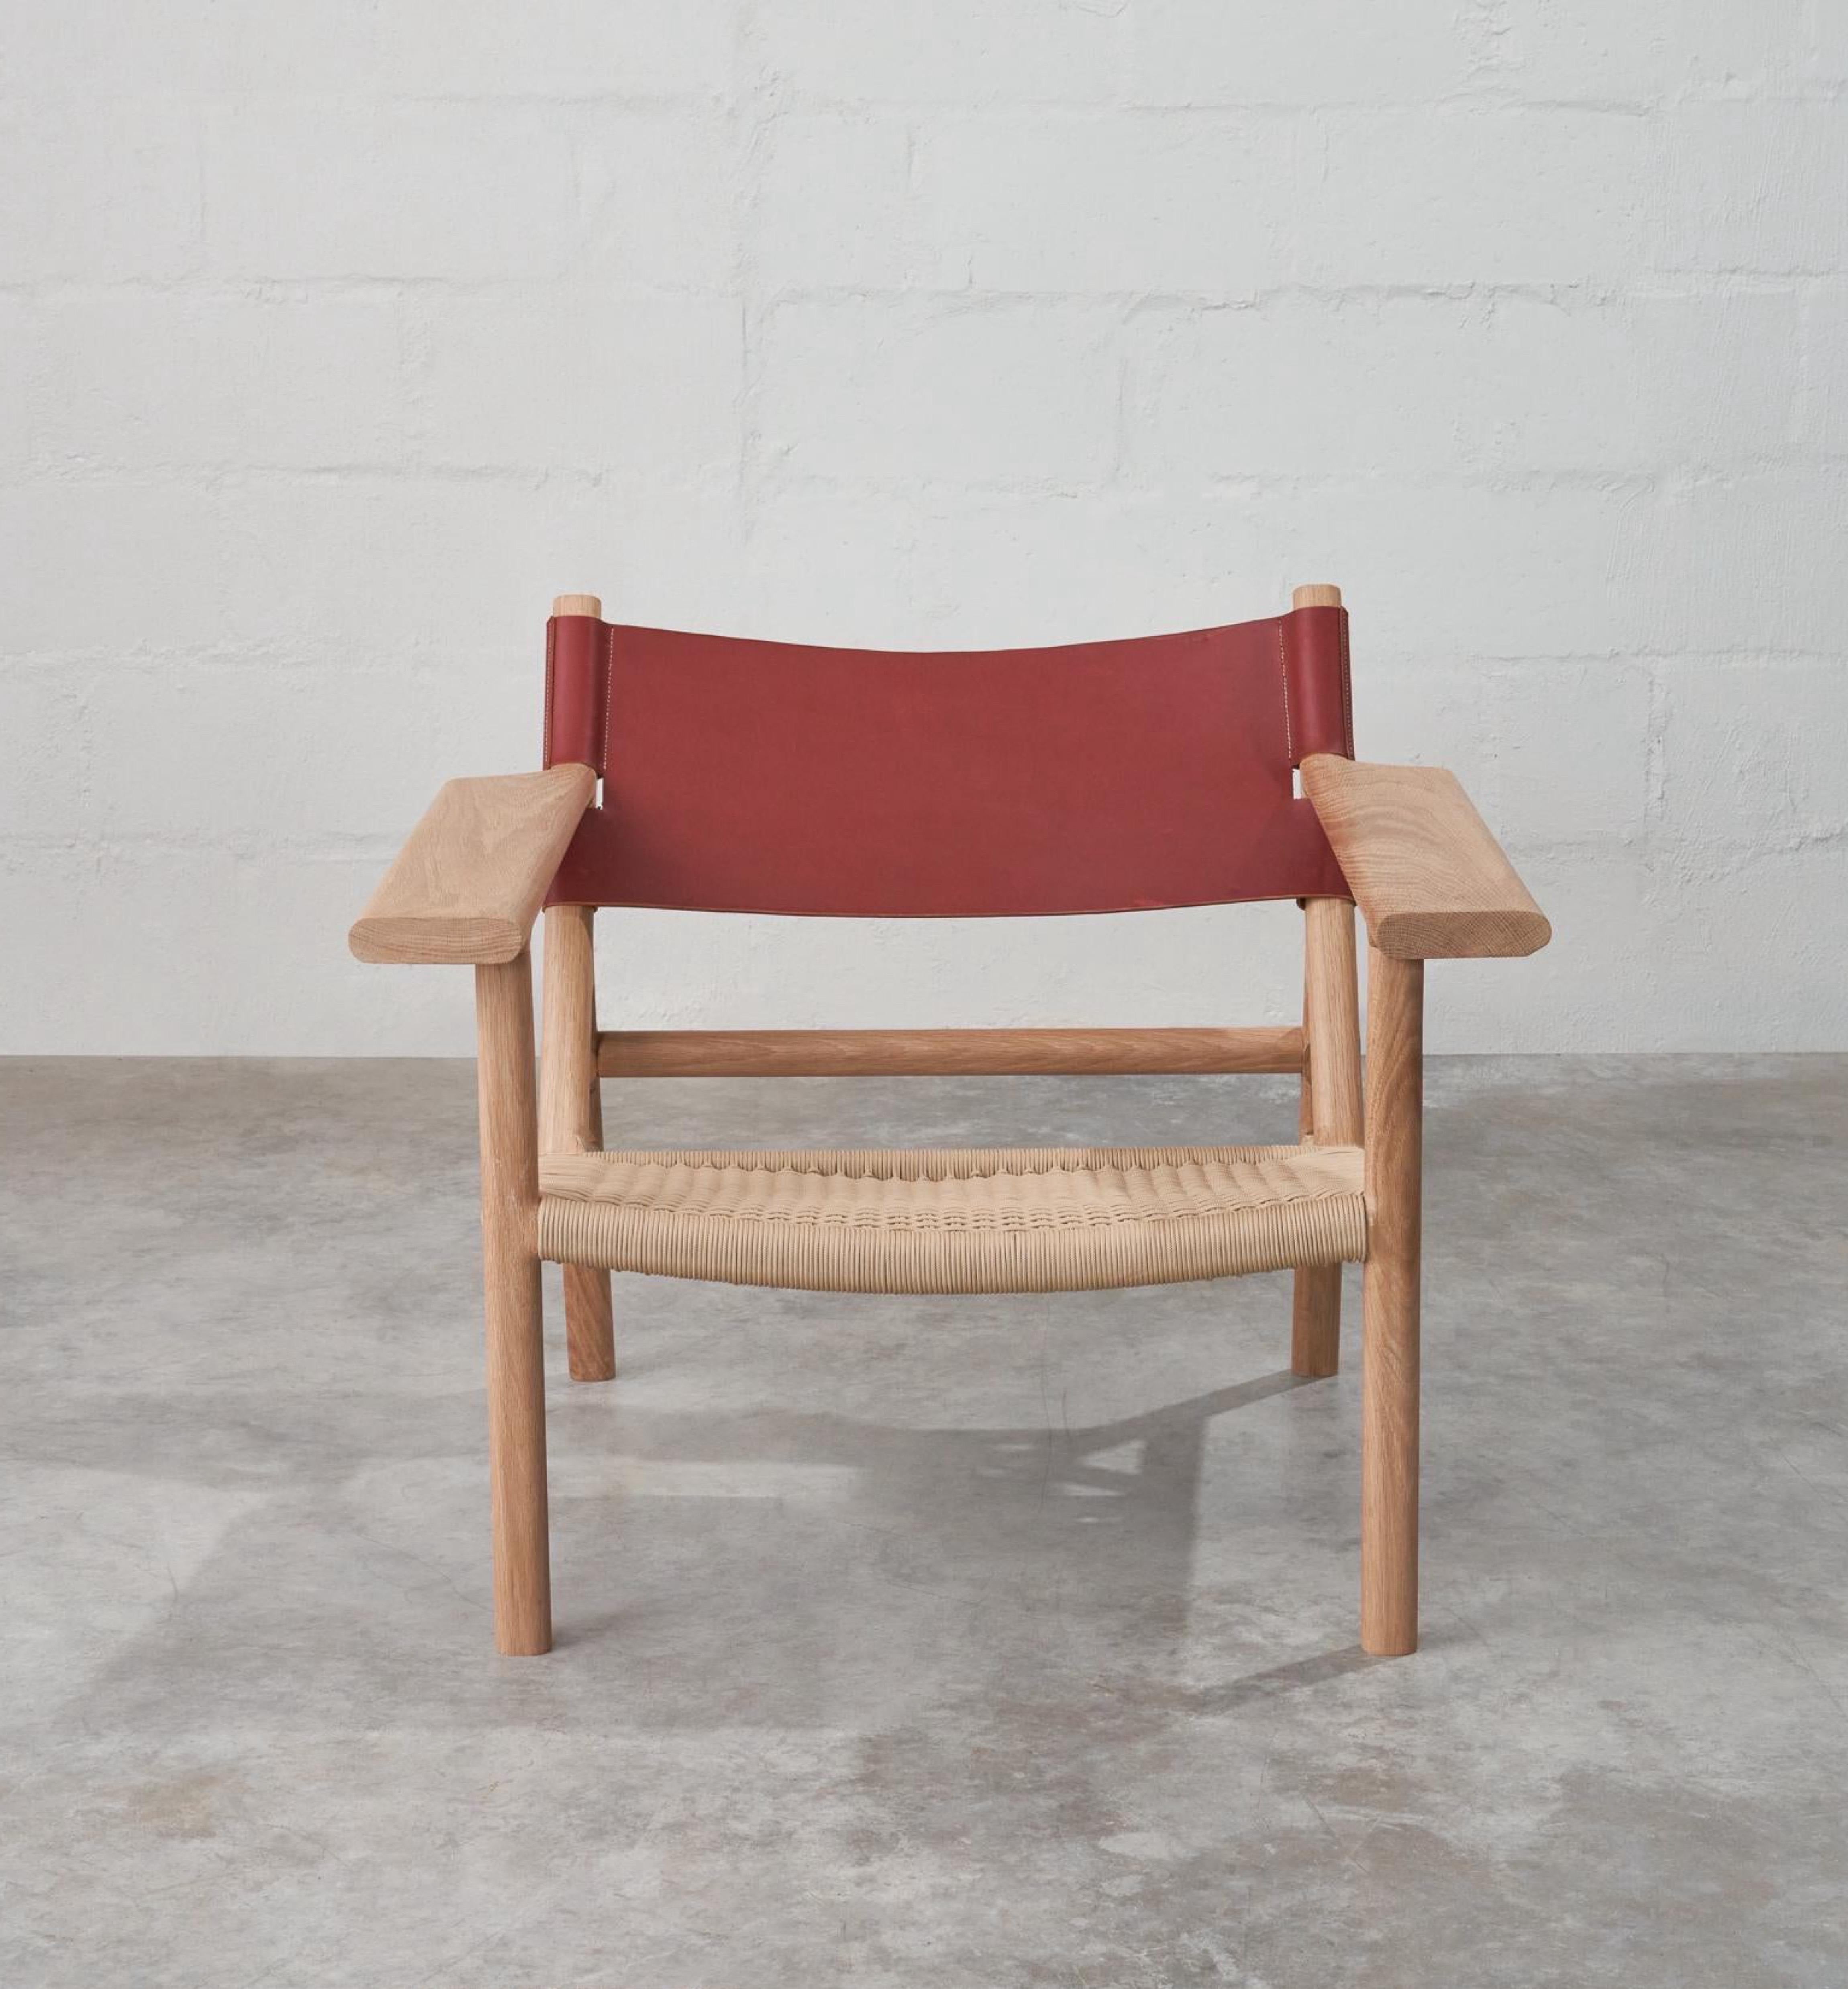 The Kruger chair has a strong presence with its solid oak construction, full grain leather backrest and woven seat. The wide armrests are a nod to Børge Mogensen’s Spanish chair design incorporating his concept of timeless design where form follows